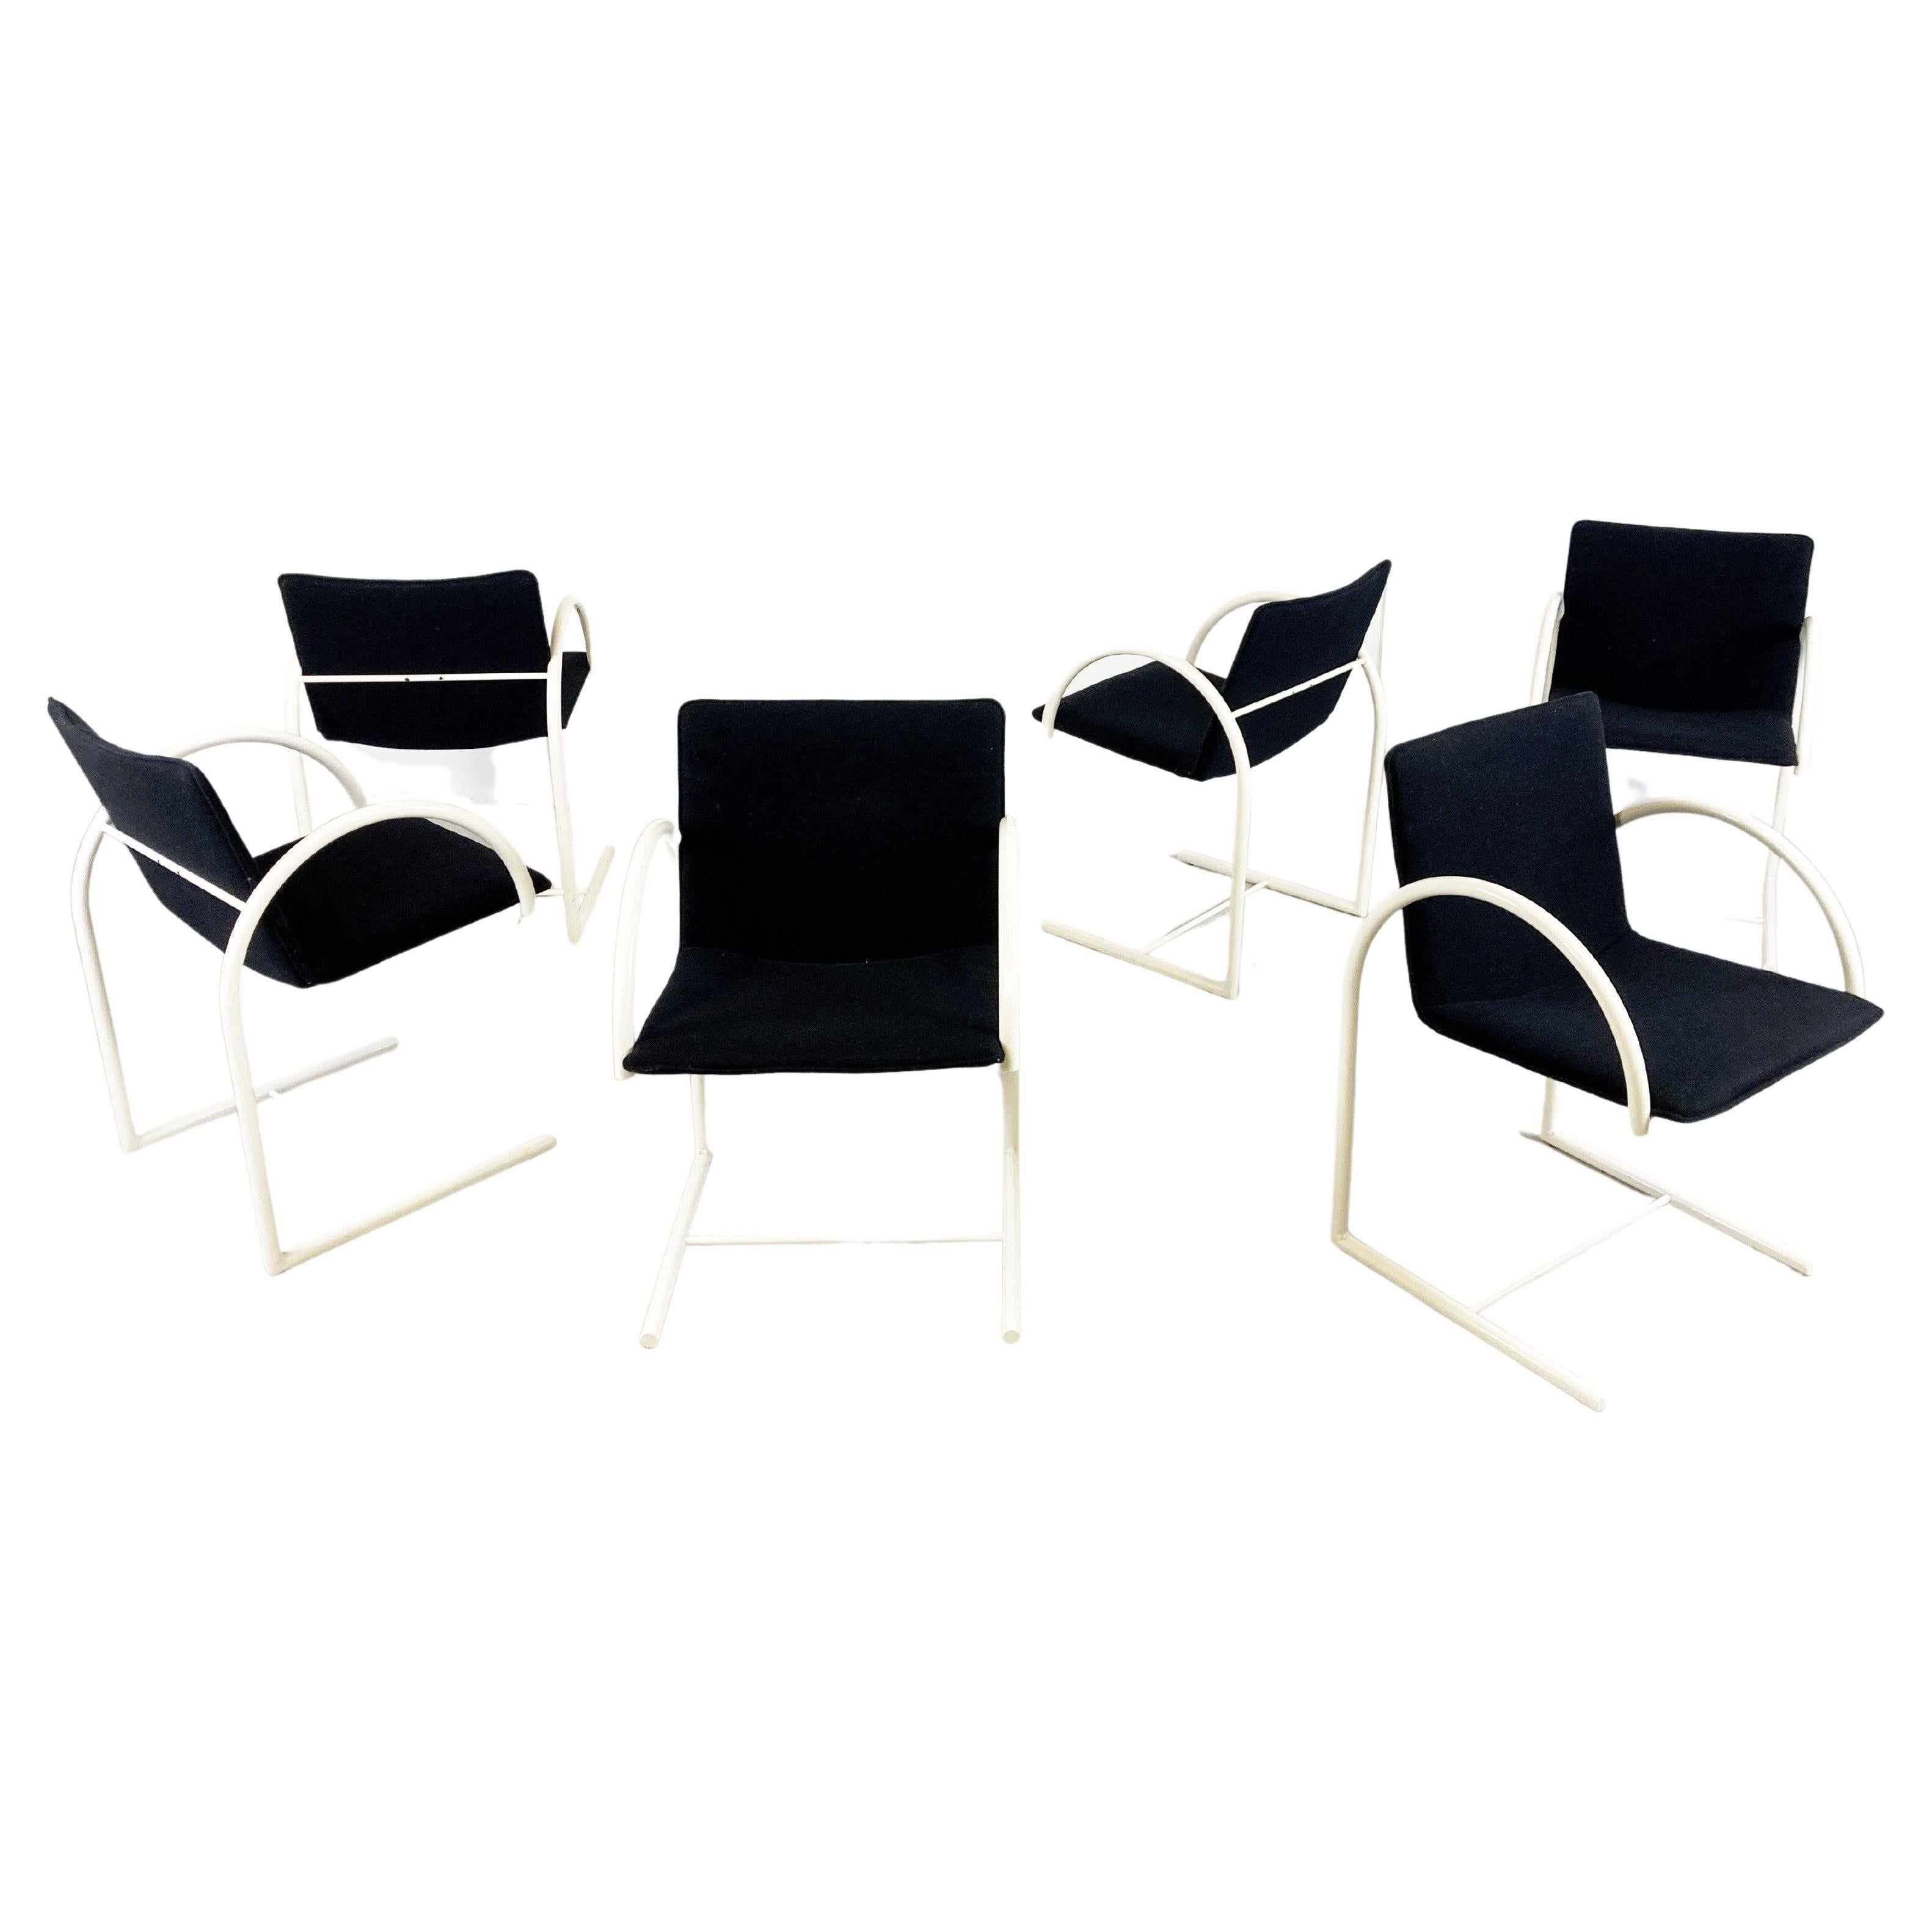 Postmodern Cirkel Dining Chairs by Metaform, 1980s, Set of 6 For Sale